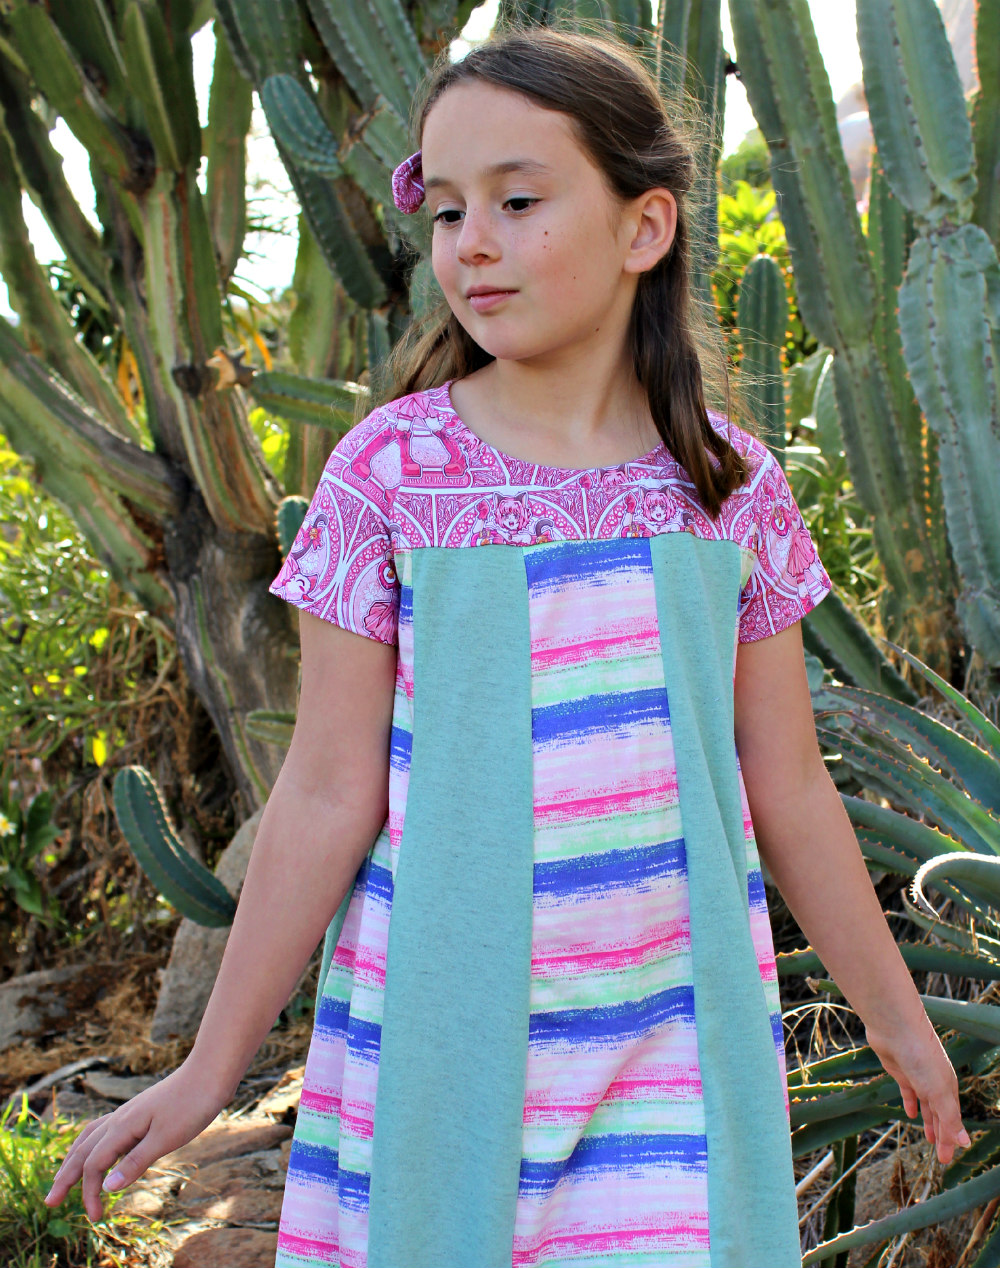 Inola's Colorblocked Dress and Top Sizes 2T to 14 Kids PDF Pattern